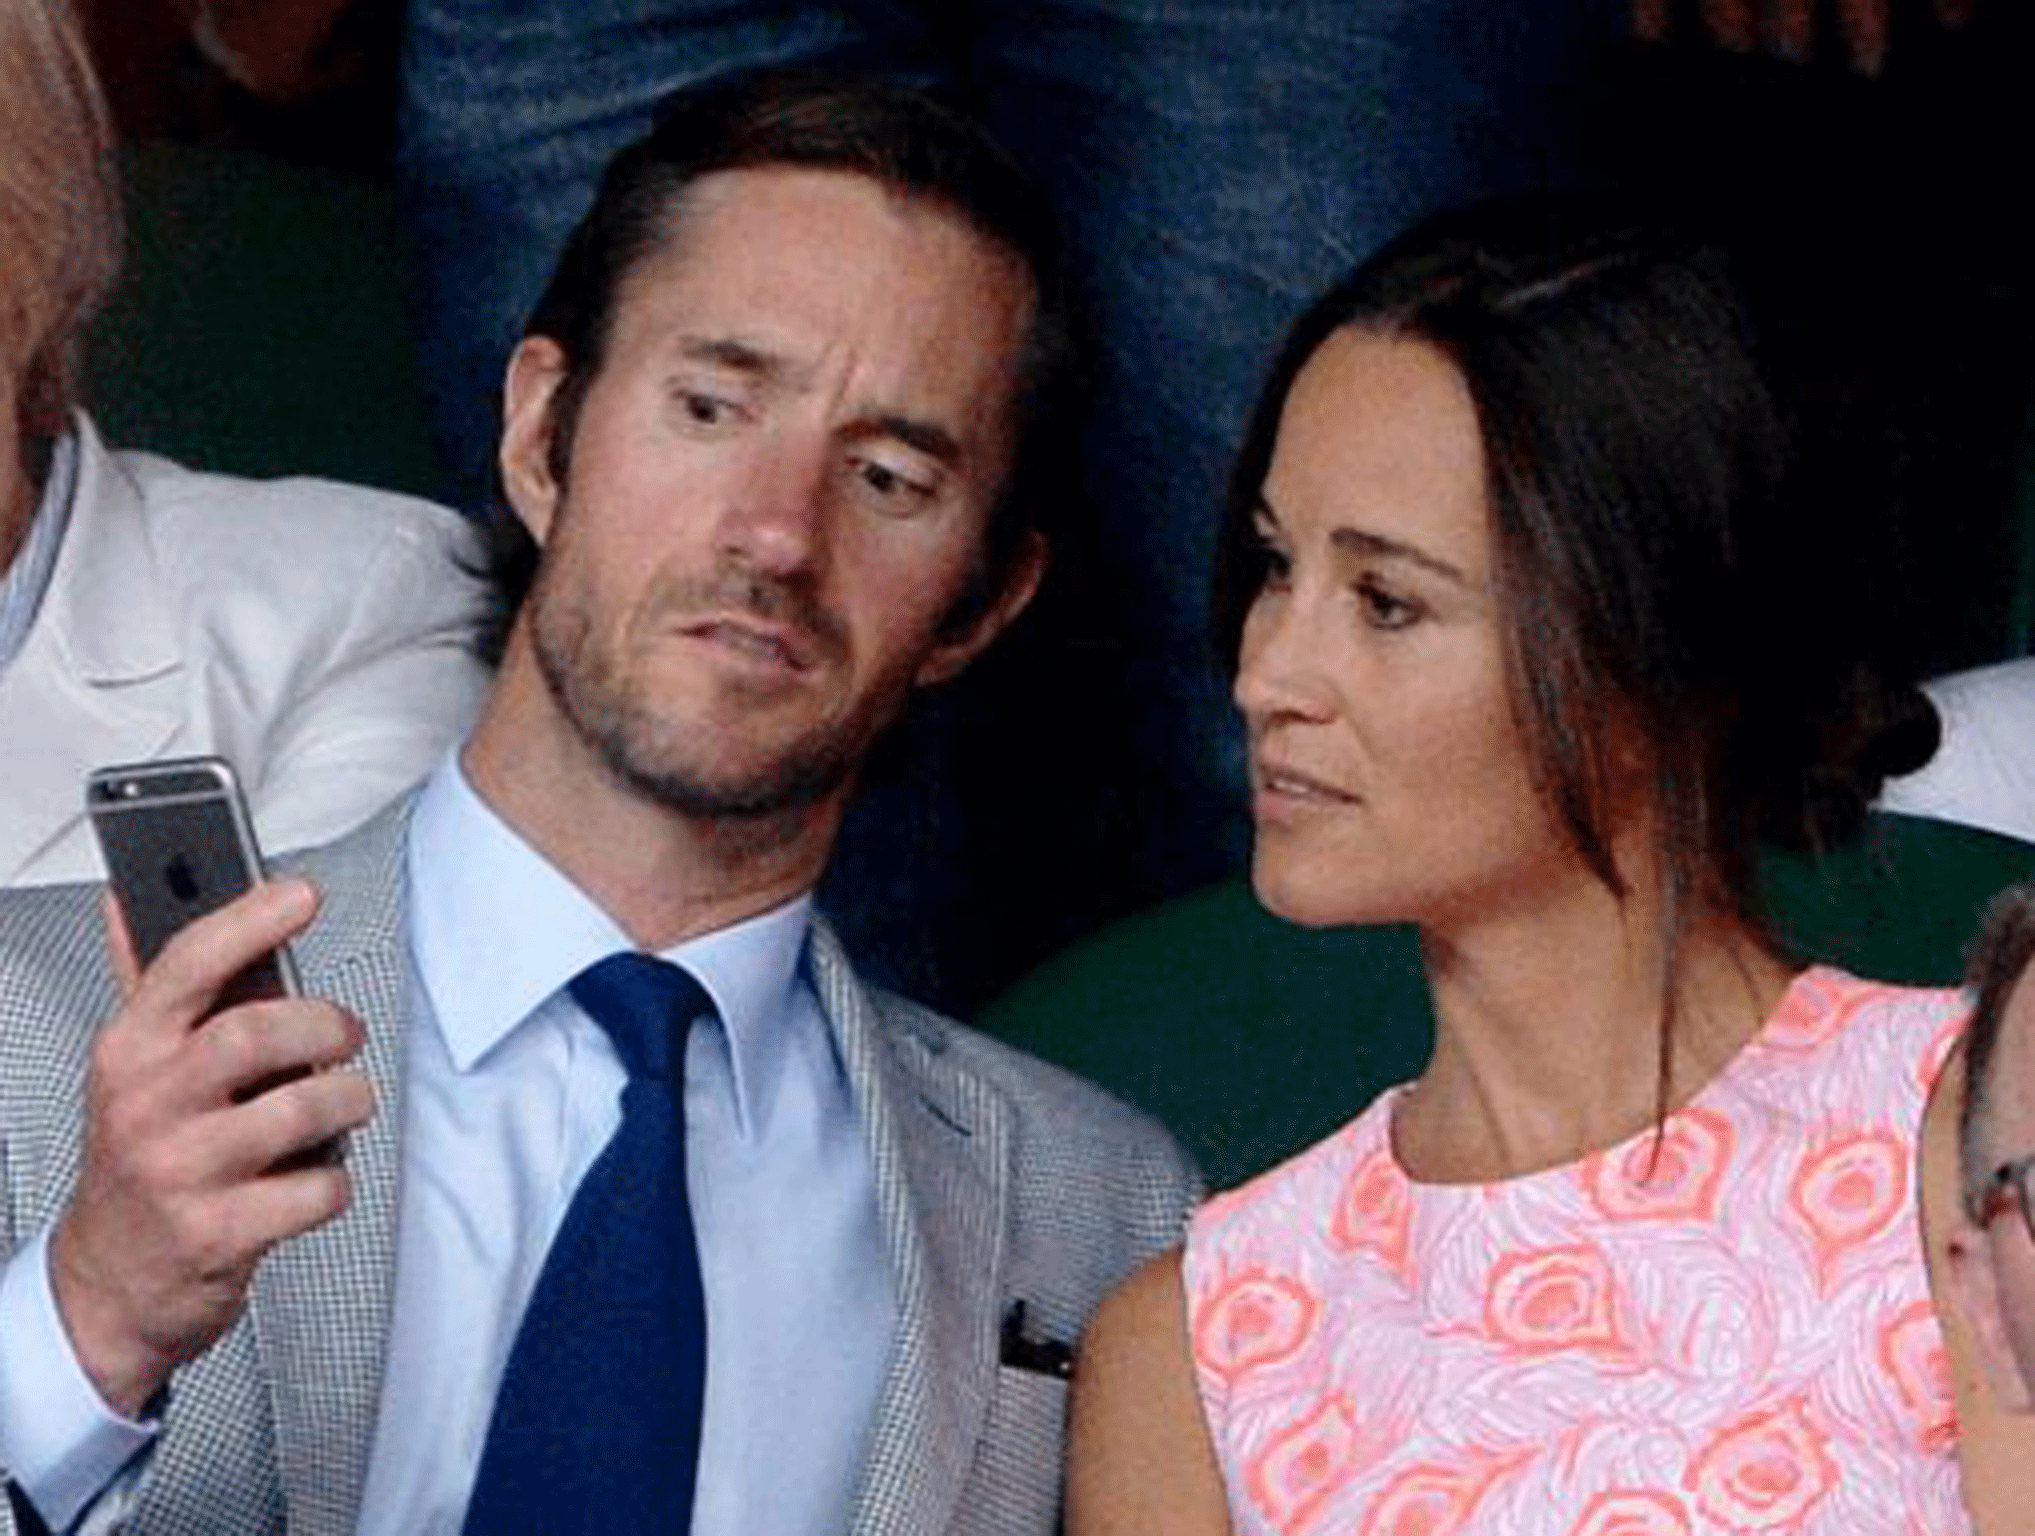 Pippa Middleton photos leak: Man arrested in connection with suspected iCloud hack